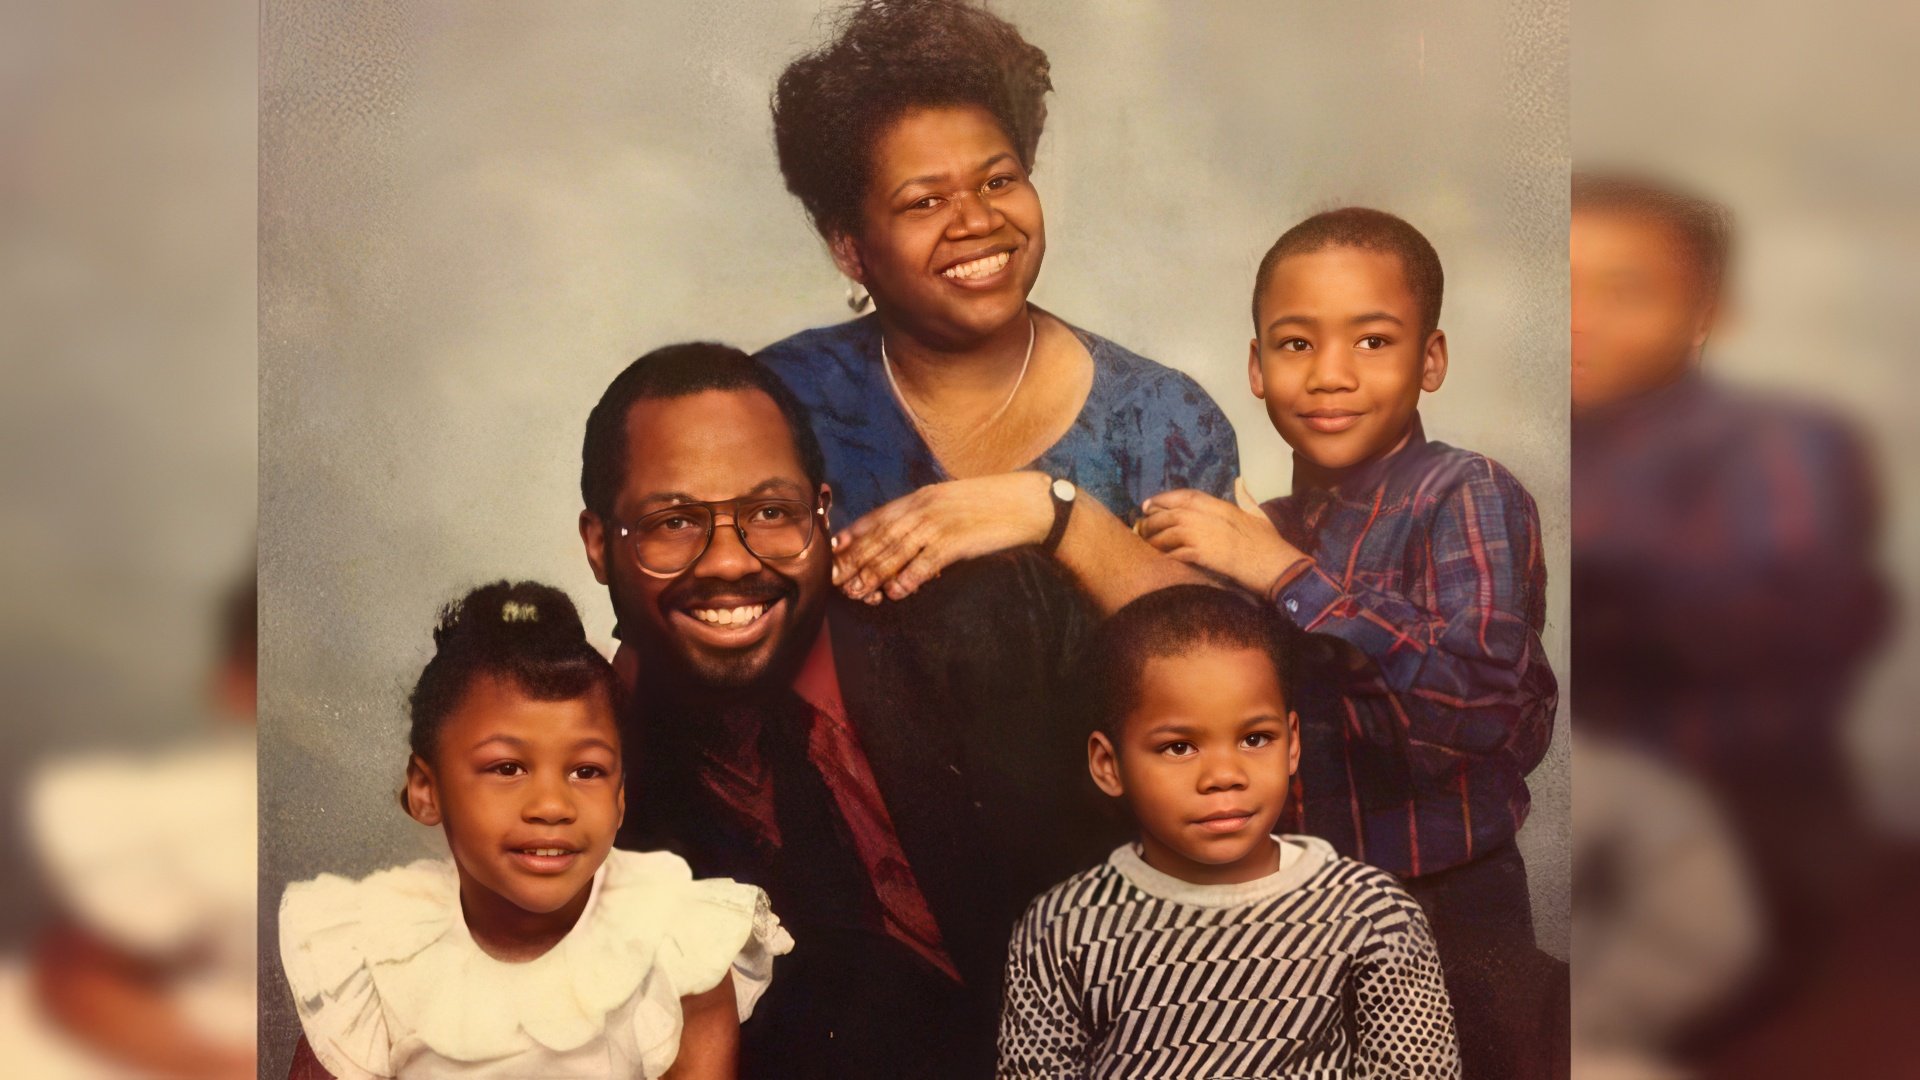 Donald Glover as a child with his family